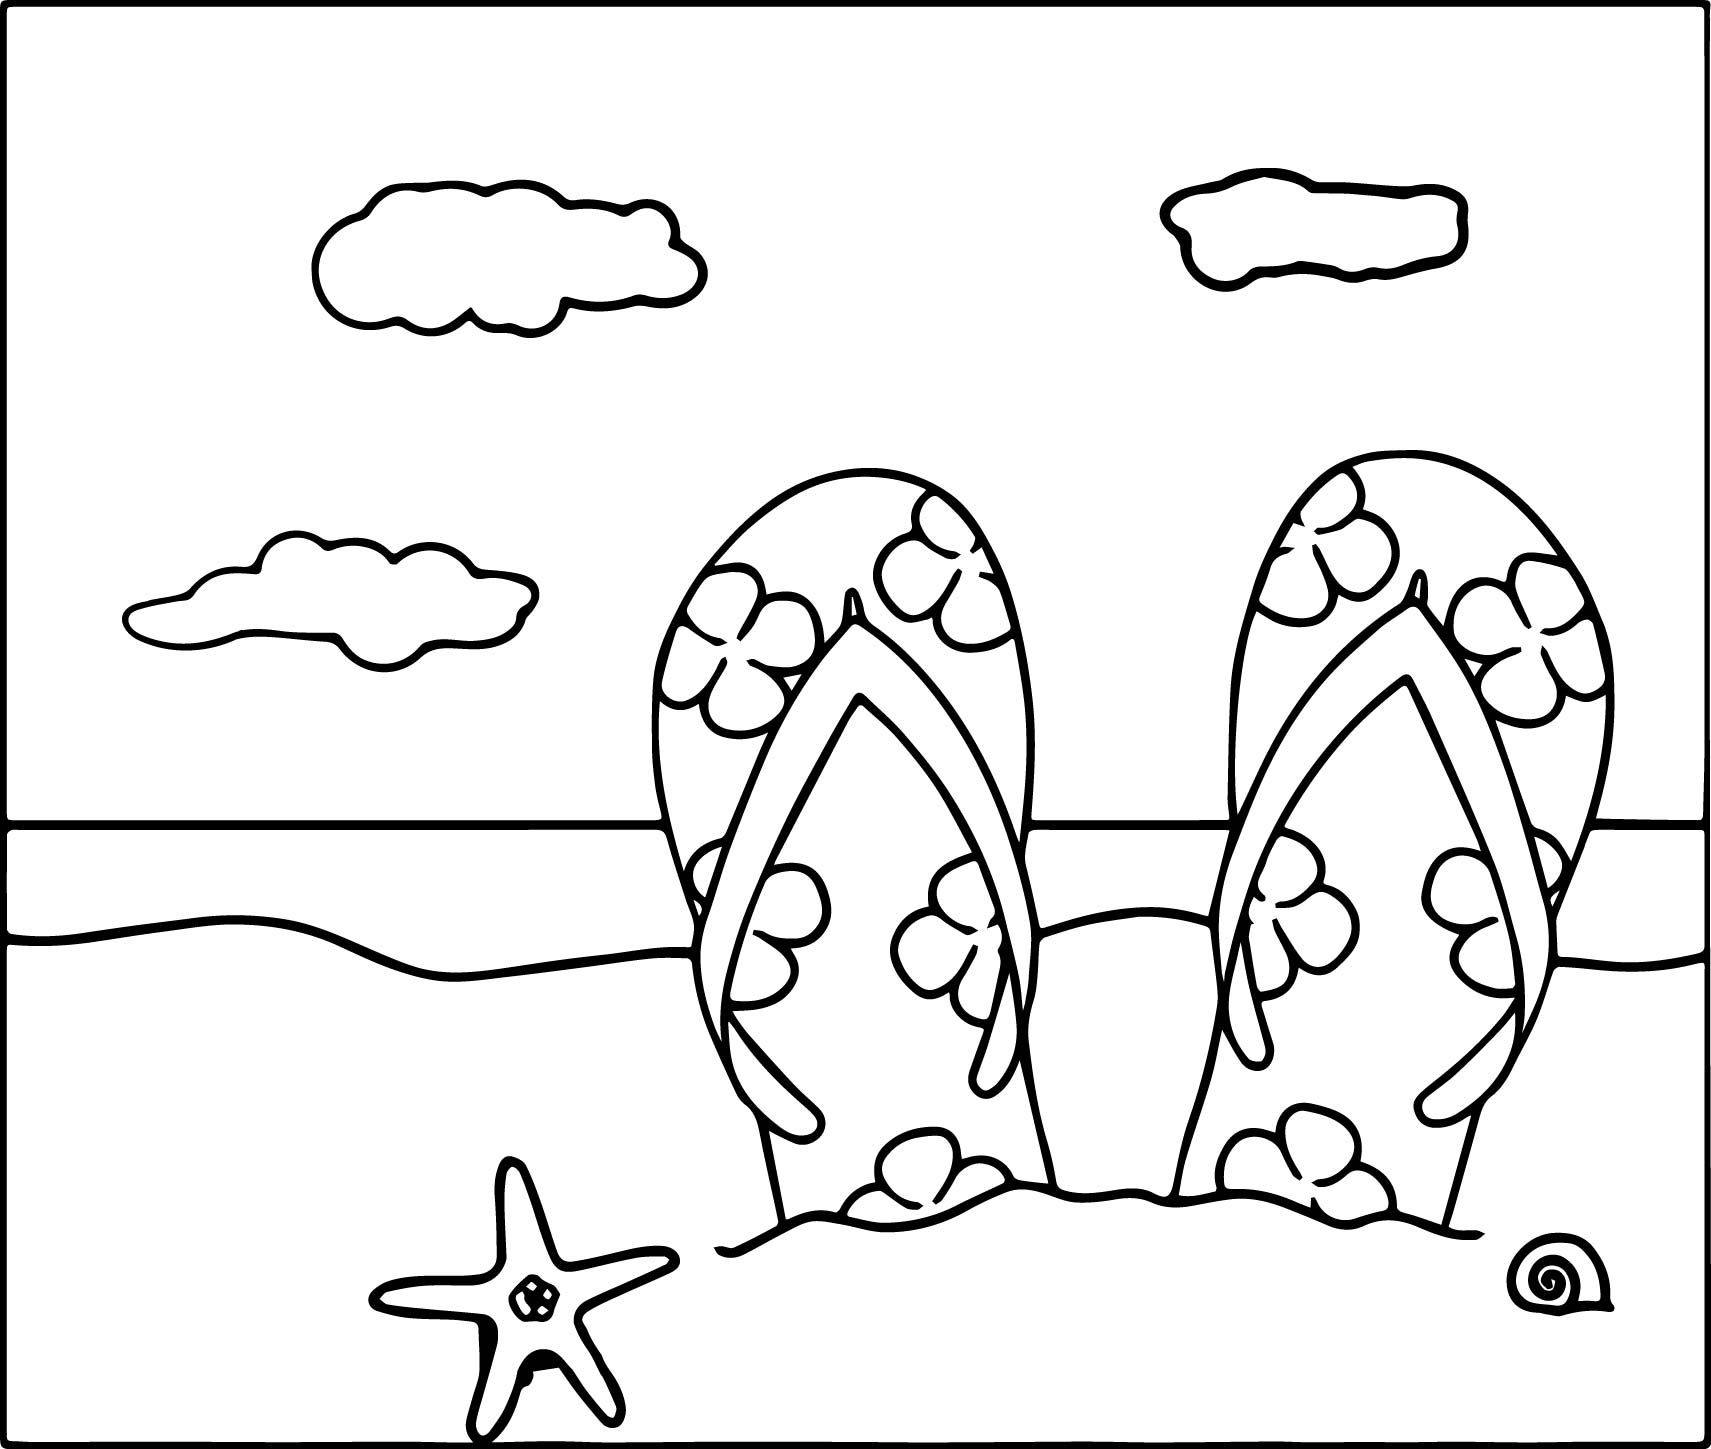 Beach Coloring Pages Nature Hd Wallpaper